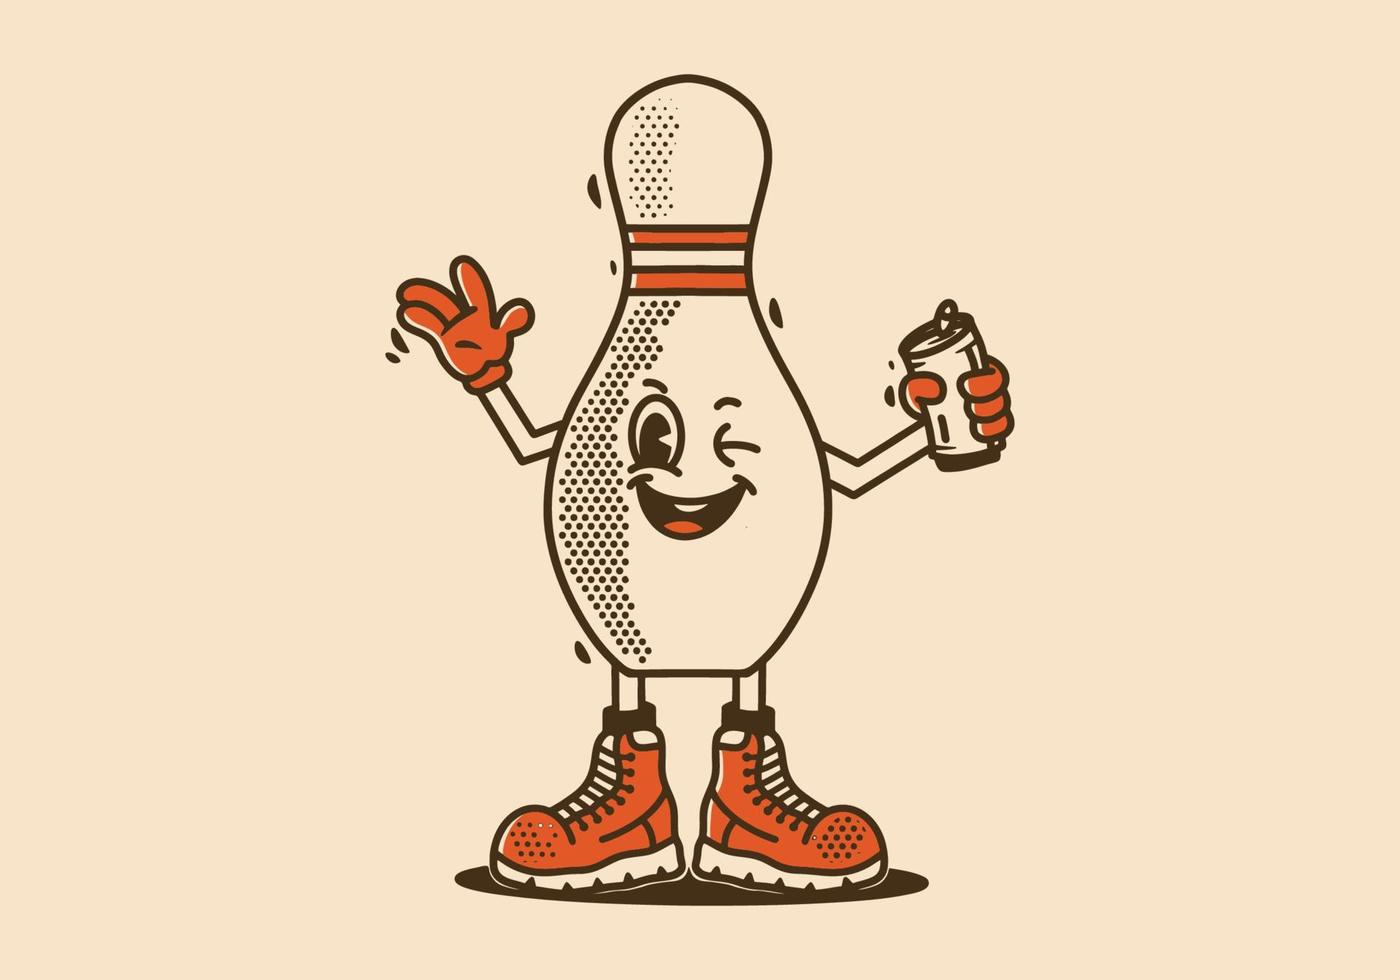 Character design of a bowling pin holding a beer can vector